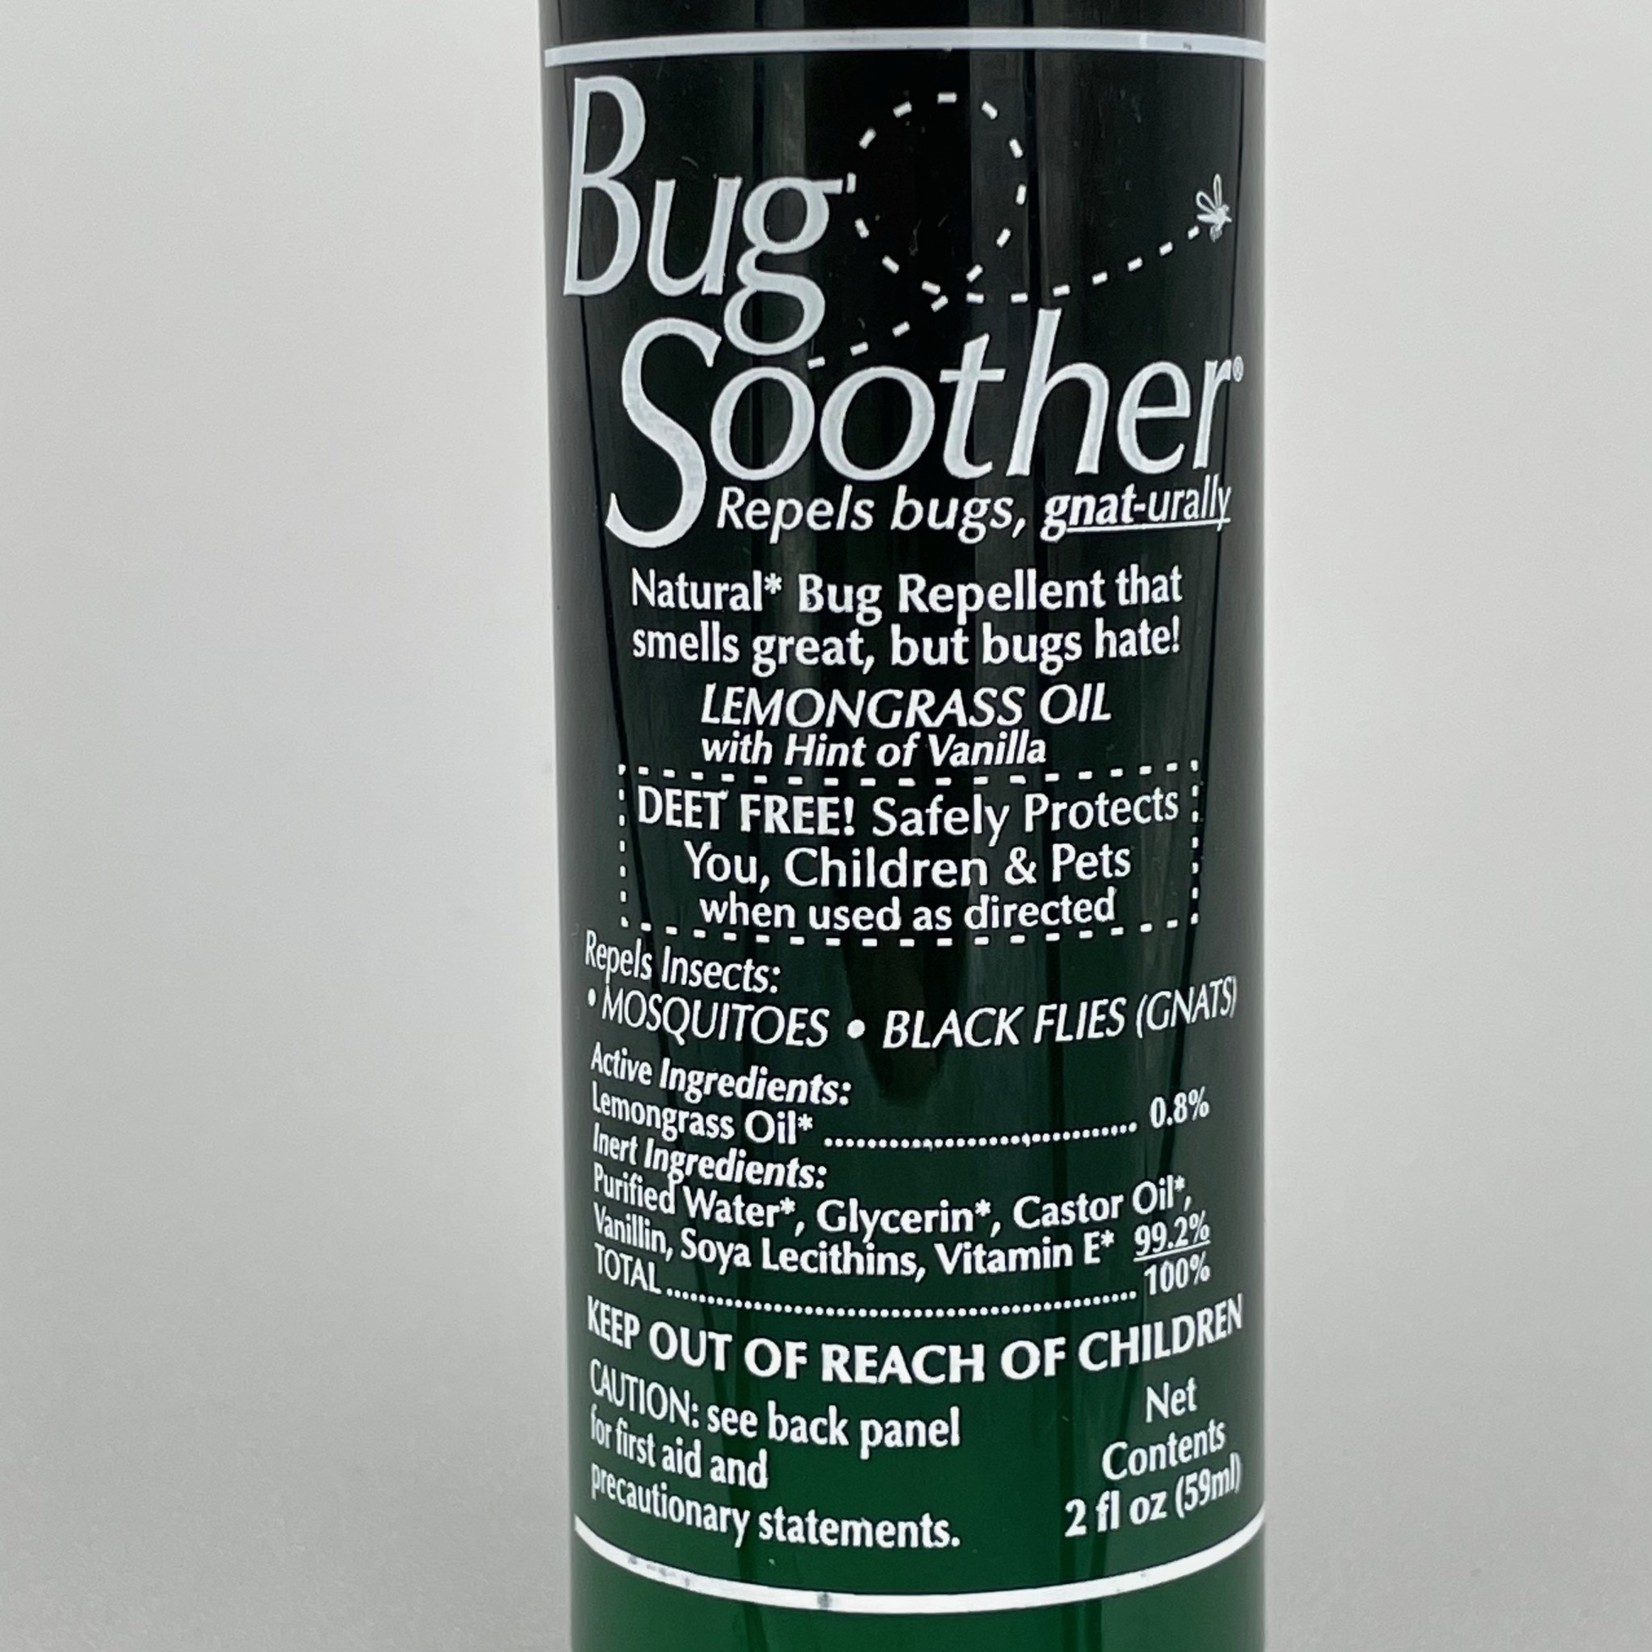 Bug Soother Bug Soother Bug Repellent